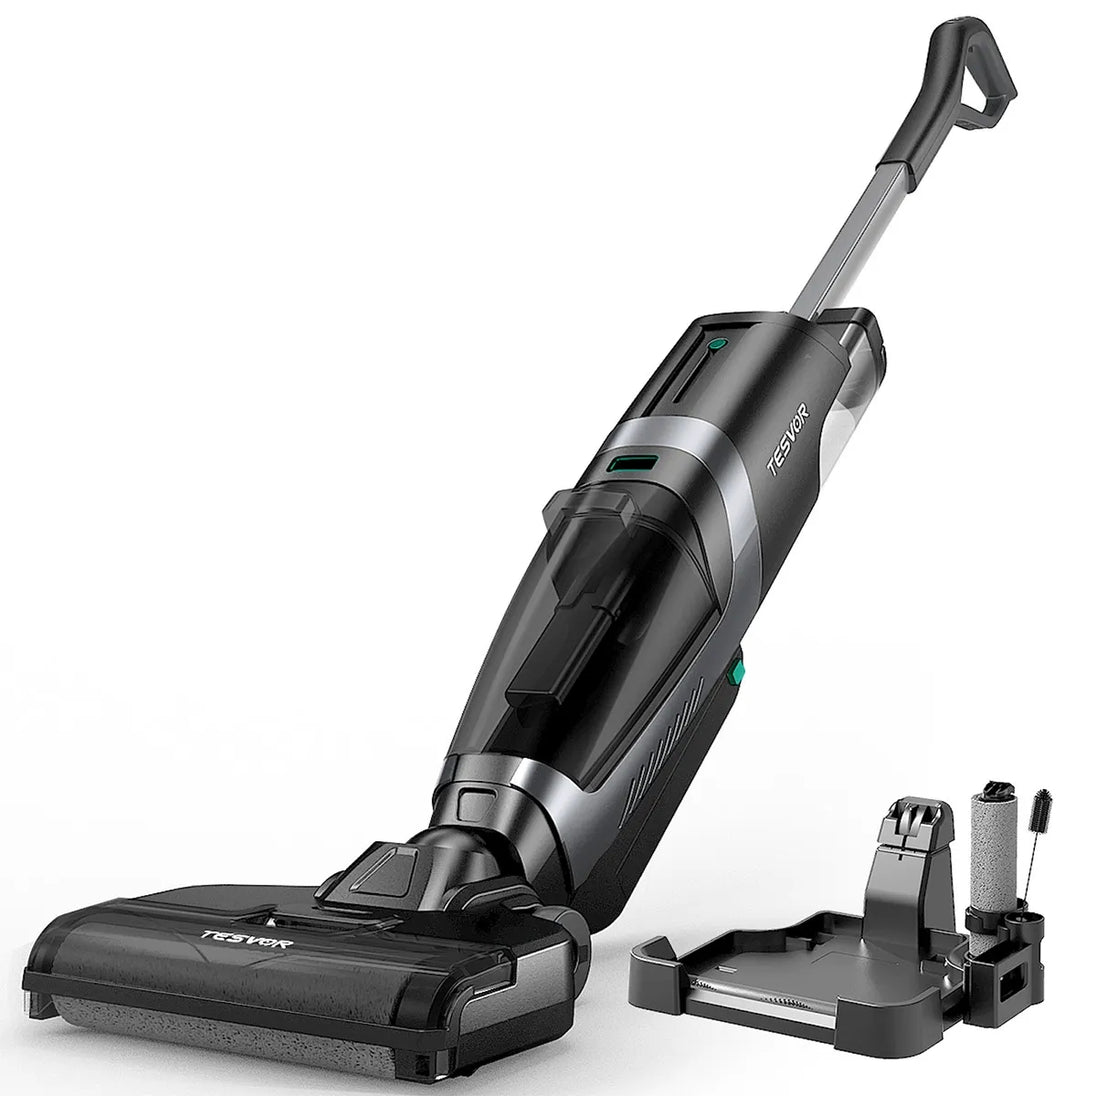 Tesvor R5 Wet Dry Vacuum Cleaner Suction, Sweeping and Moping 3 in 1 [